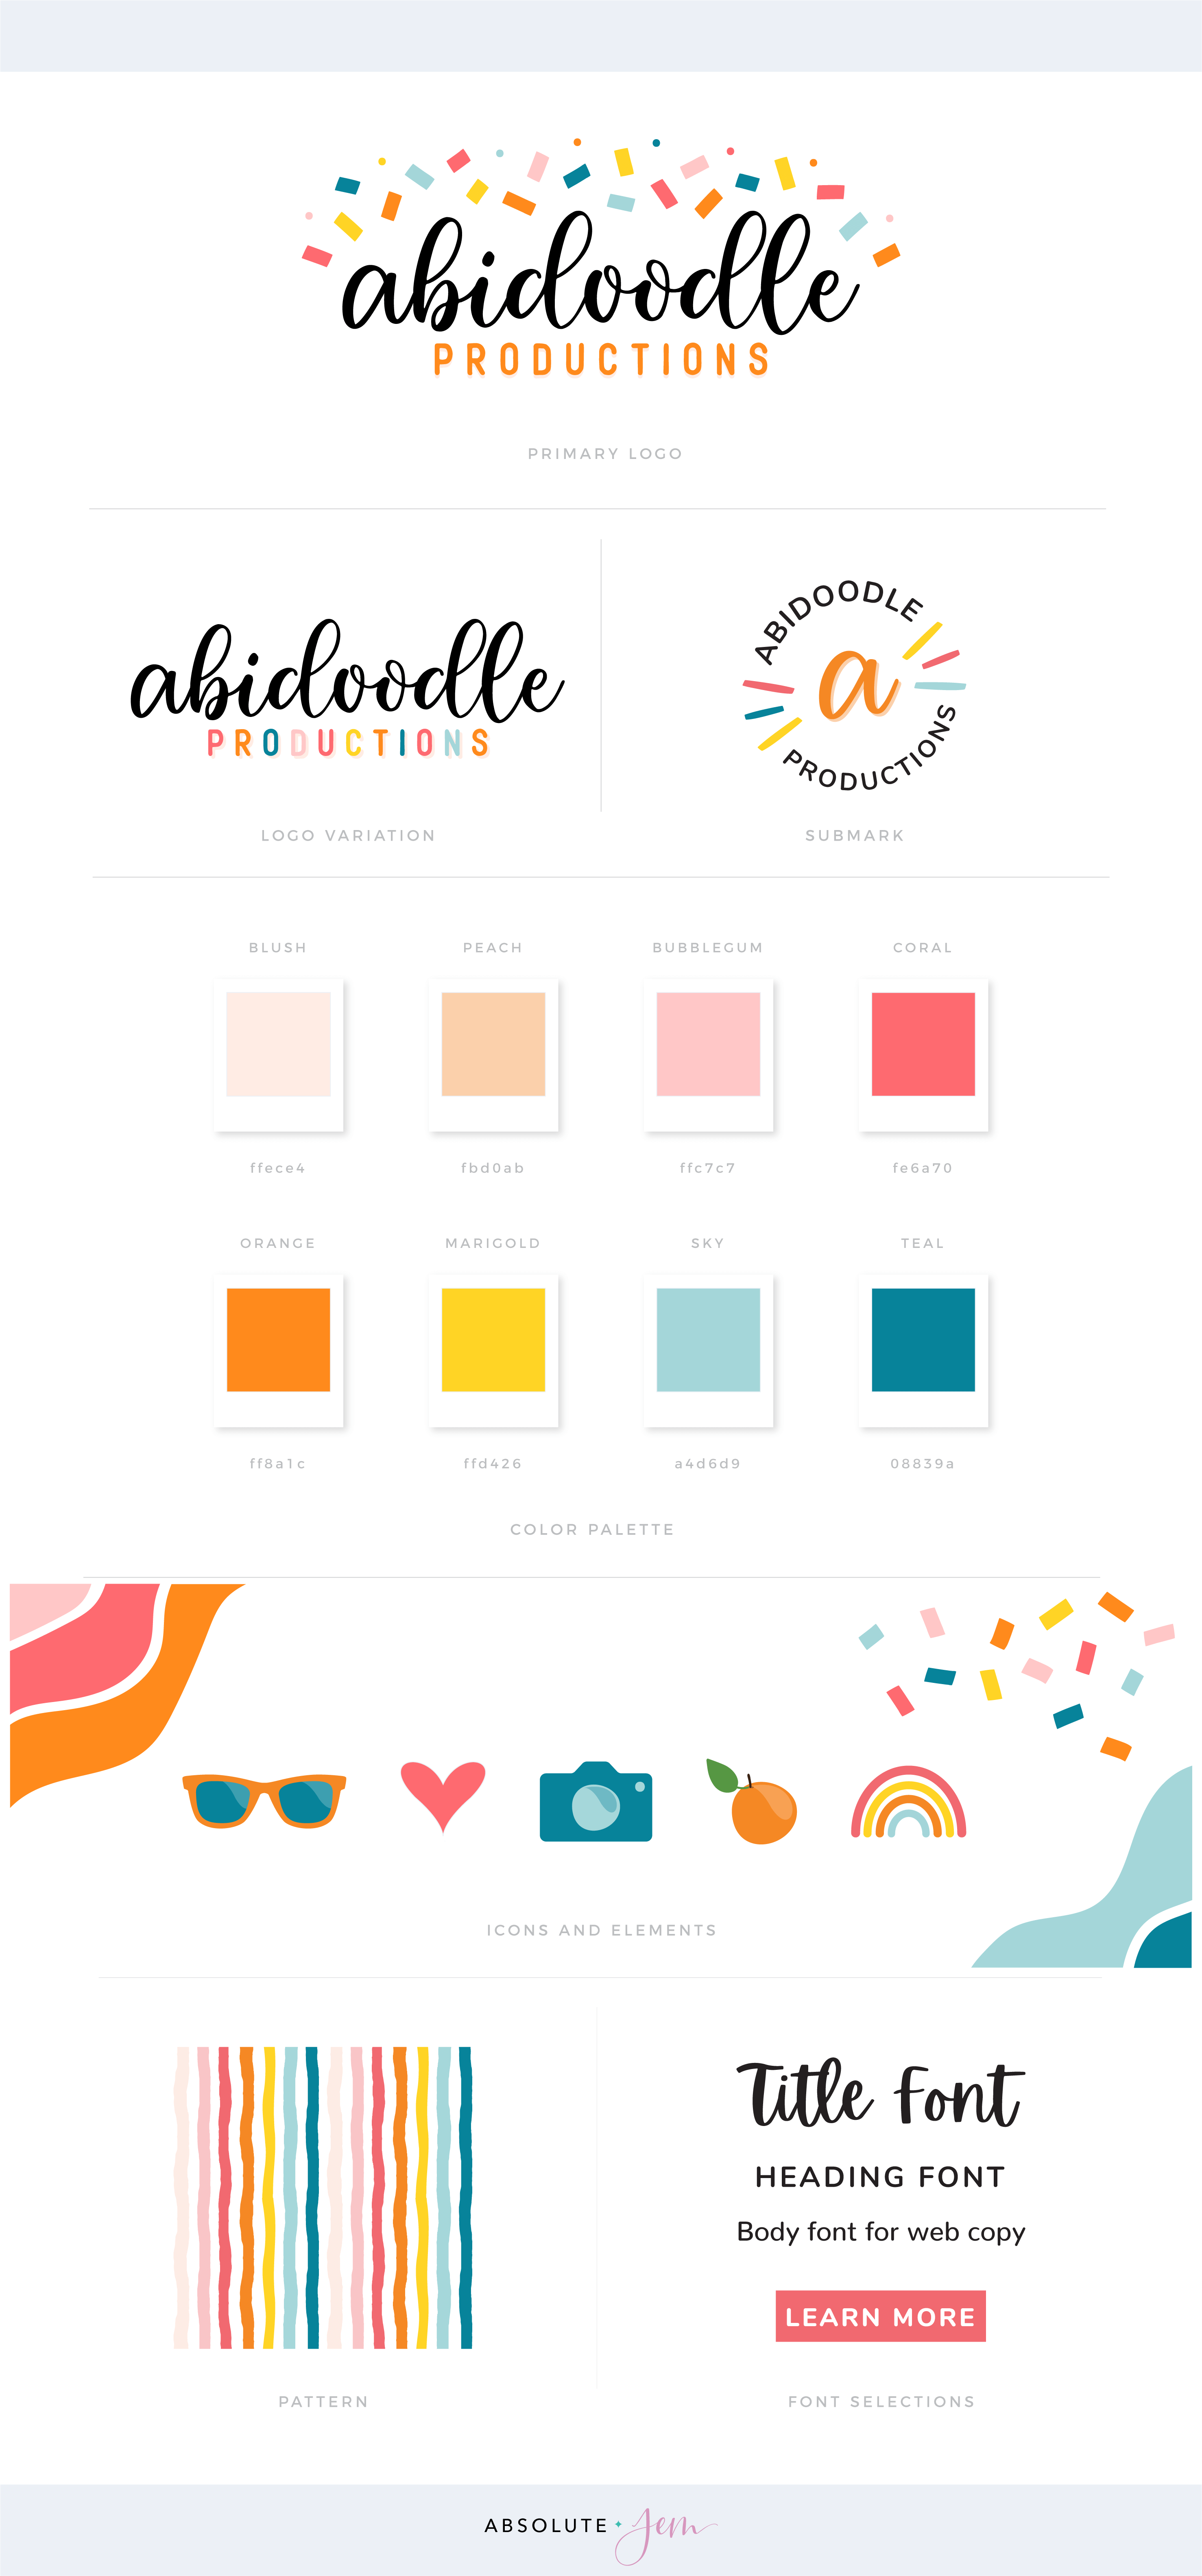 Abidoodle Productions | Colorful Visual Branding by Absolute JEM